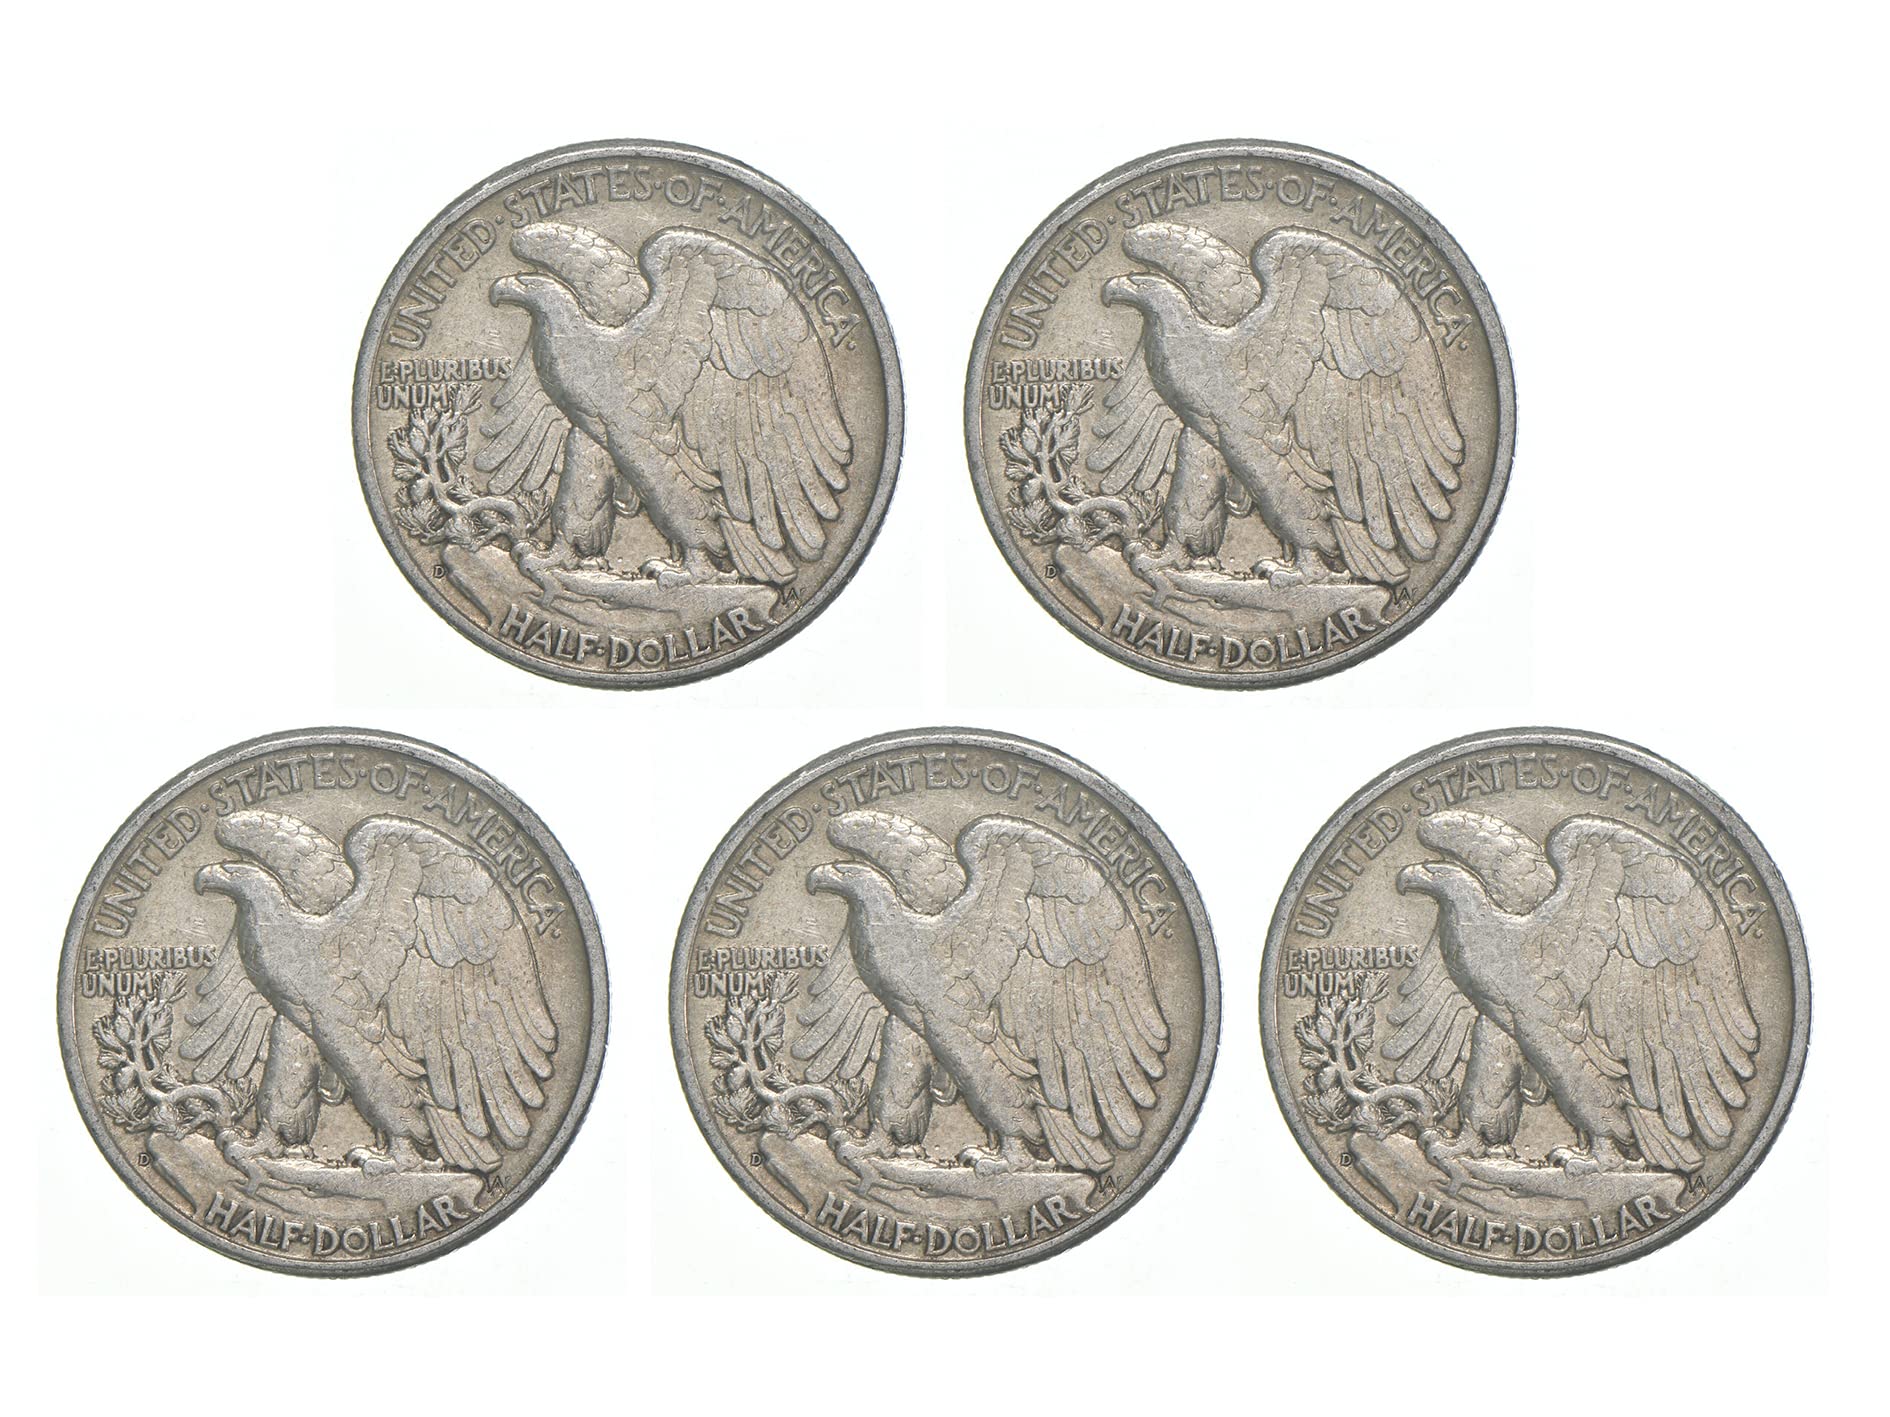 1916-1947 Set of 5 Silver Walking Liberty Half Dollar Coins. A Beautiful USA .90 Percent Silver Coin Set, 1.80 Troy Ounces Silver Weight. 50 Cents (5 Coins) Graded By Seller Circulated Condition